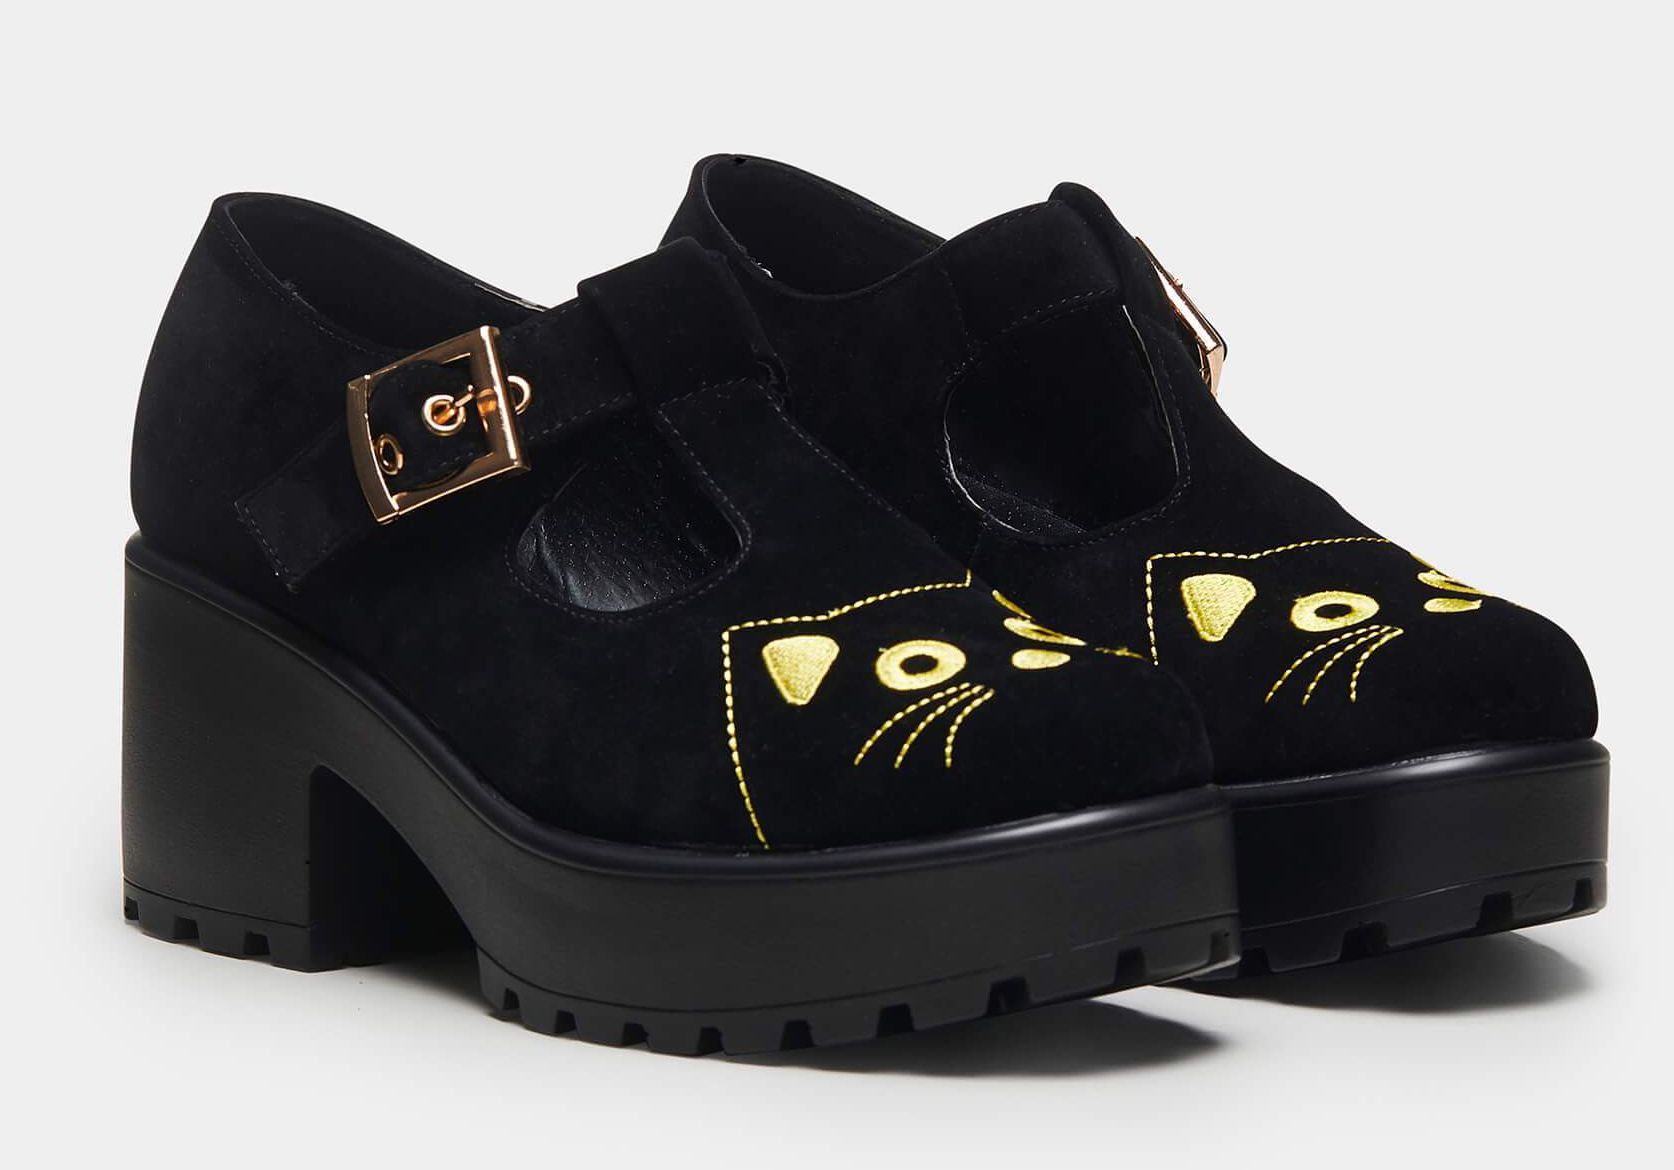 kfnd65bbbbb_chaussures-mary-jane-plateforme-gothique-glam-rock-fuji-cat